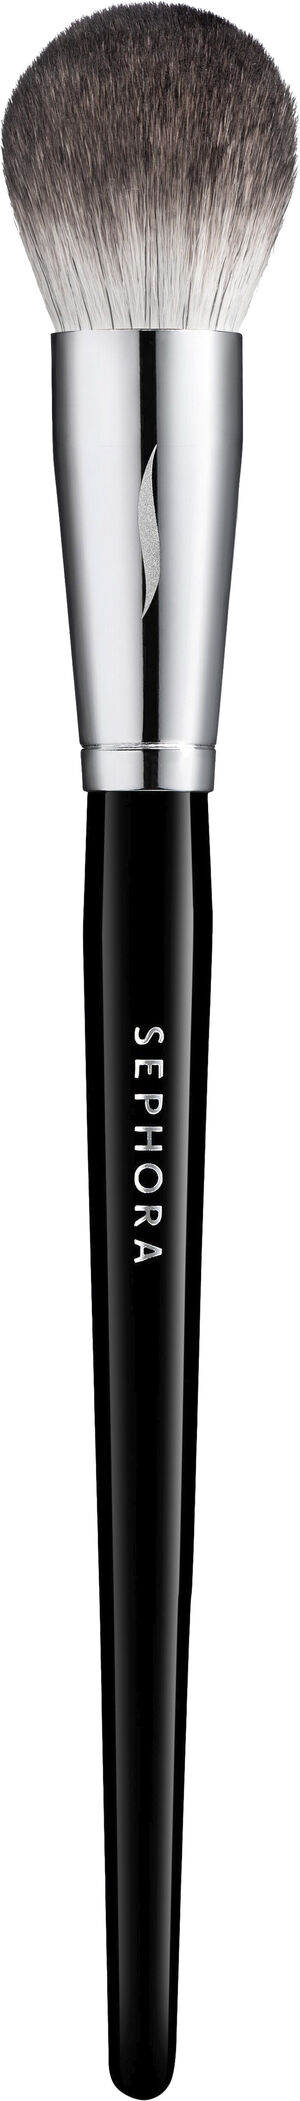 PRO Featherweight - Complexion Brush